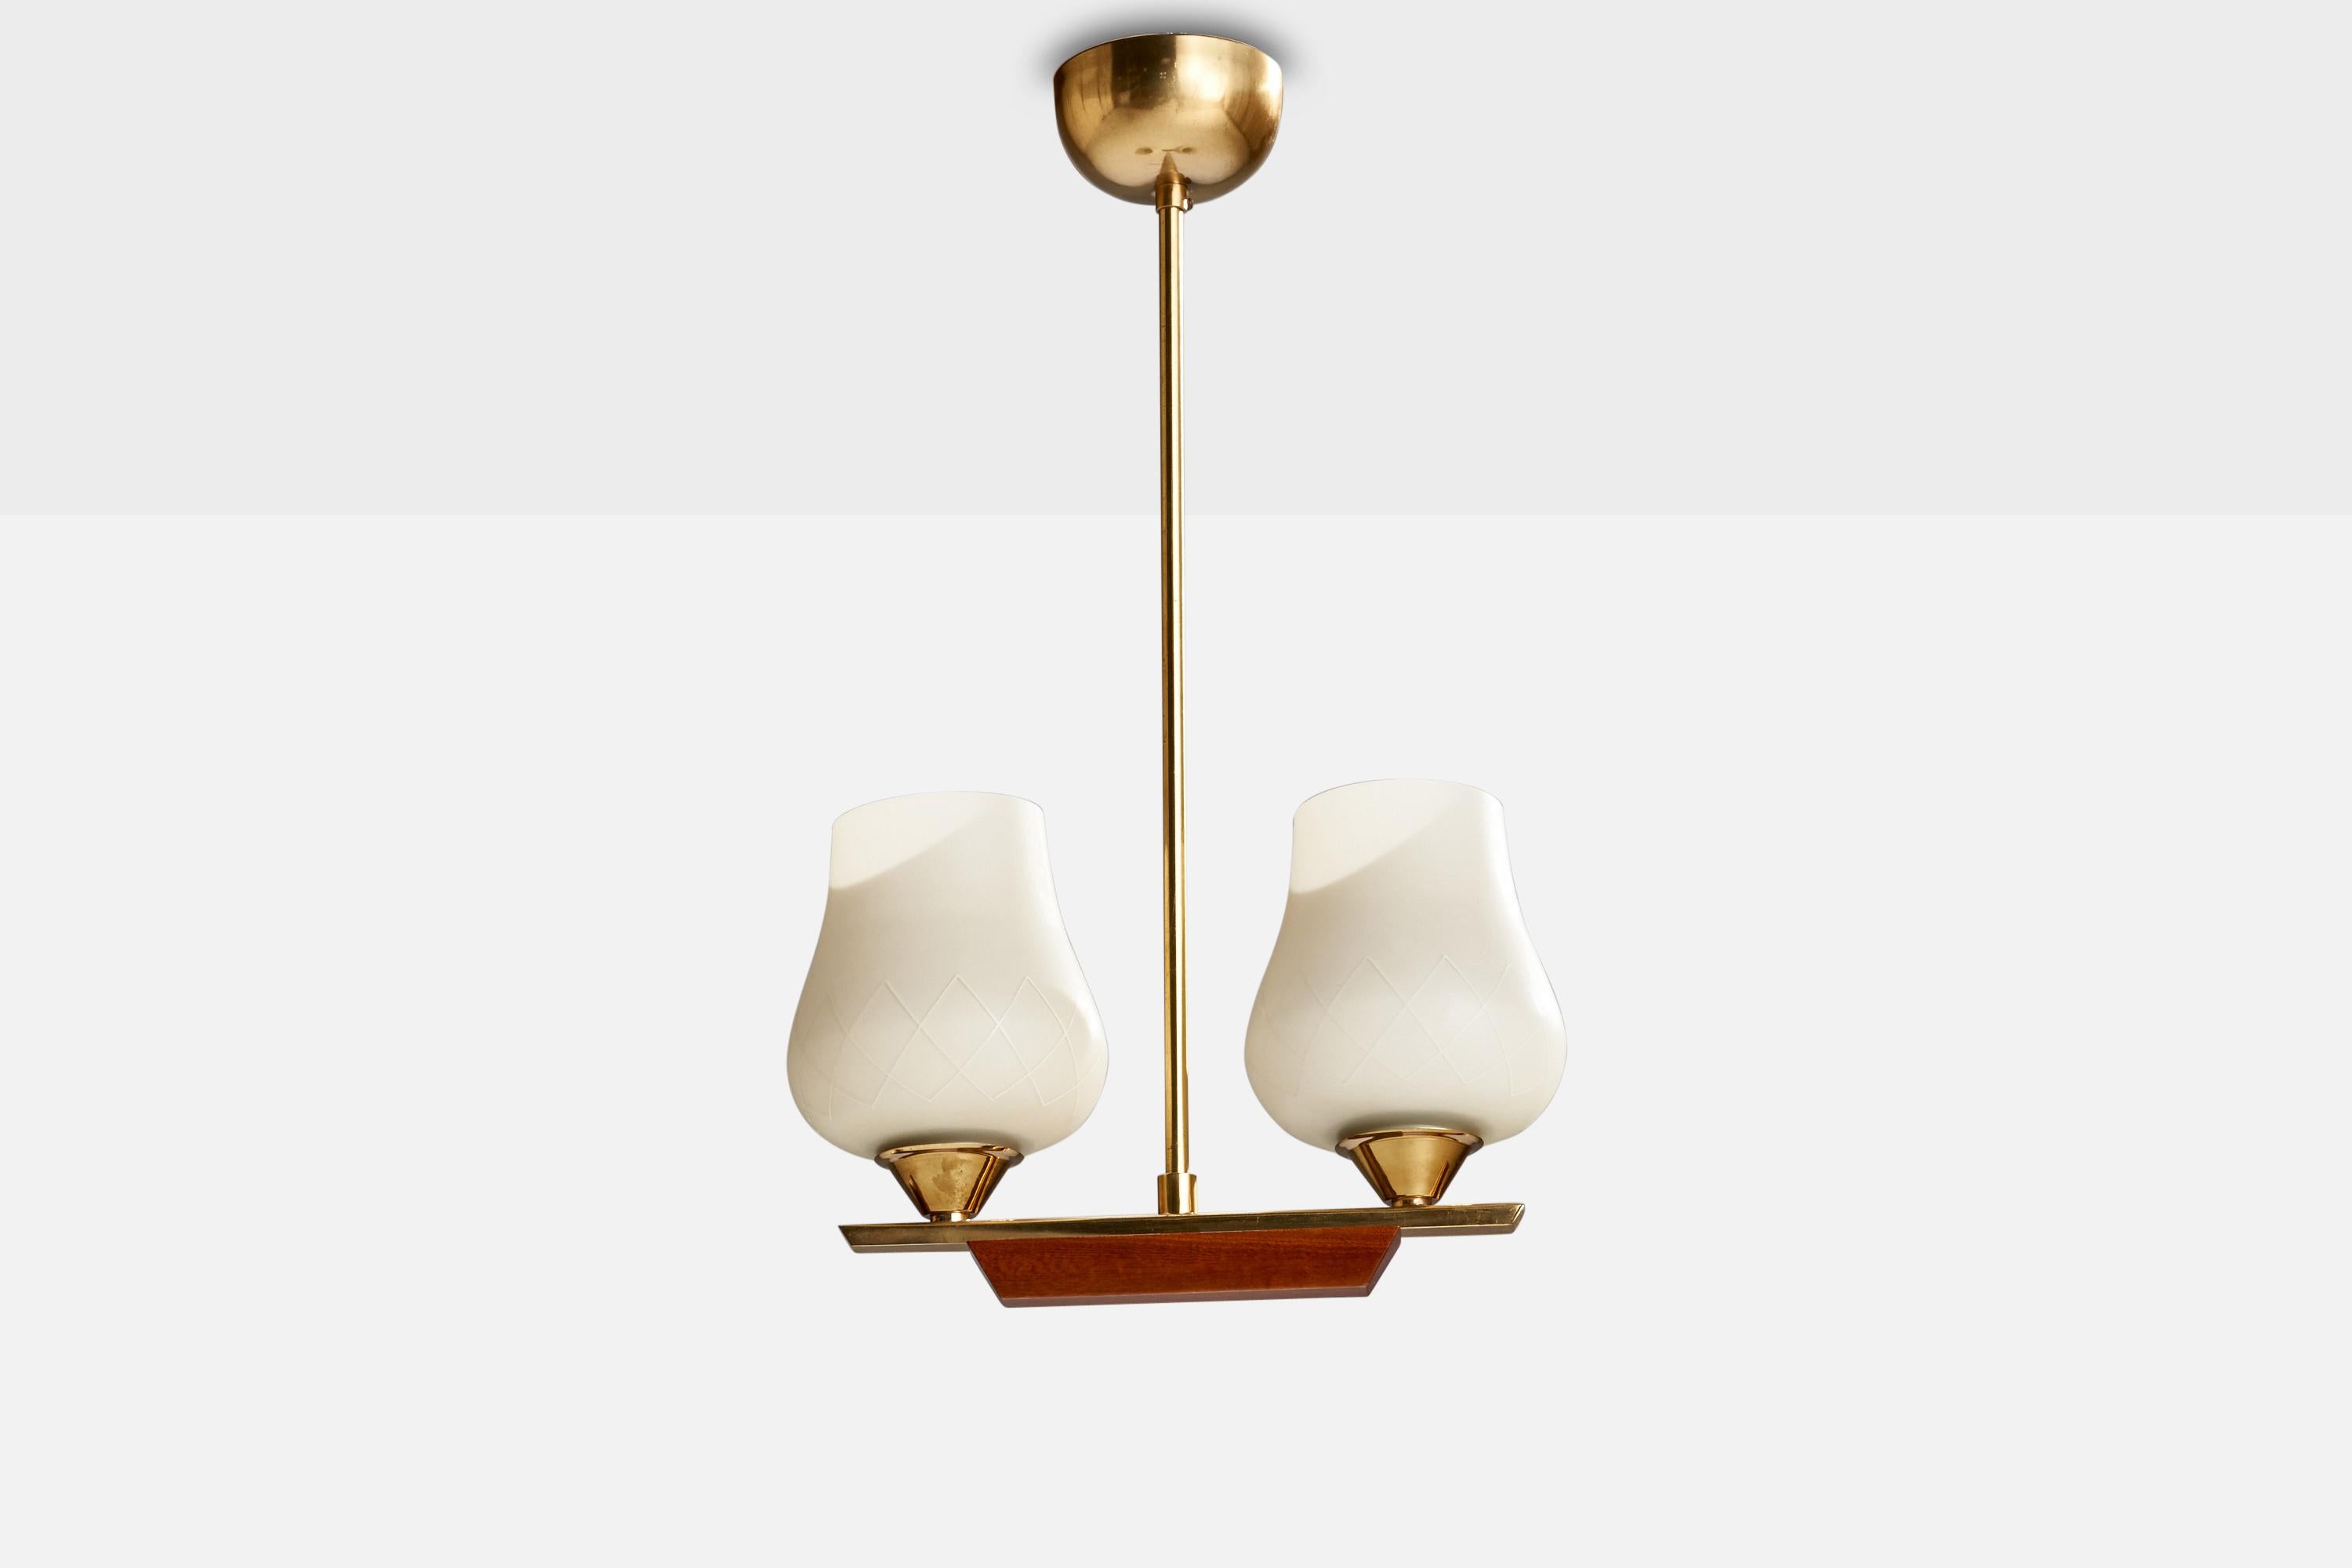 A brass, teak and opaline glass chandelier designed and produced in Sweden, c. 1950s.

Dimensions of canopy (inches): 2” H x 3.5” Diameter
Socket takes standard E-26 bulbs. 2 socket.There is no maximum wattage stated on the fixture. All lighting